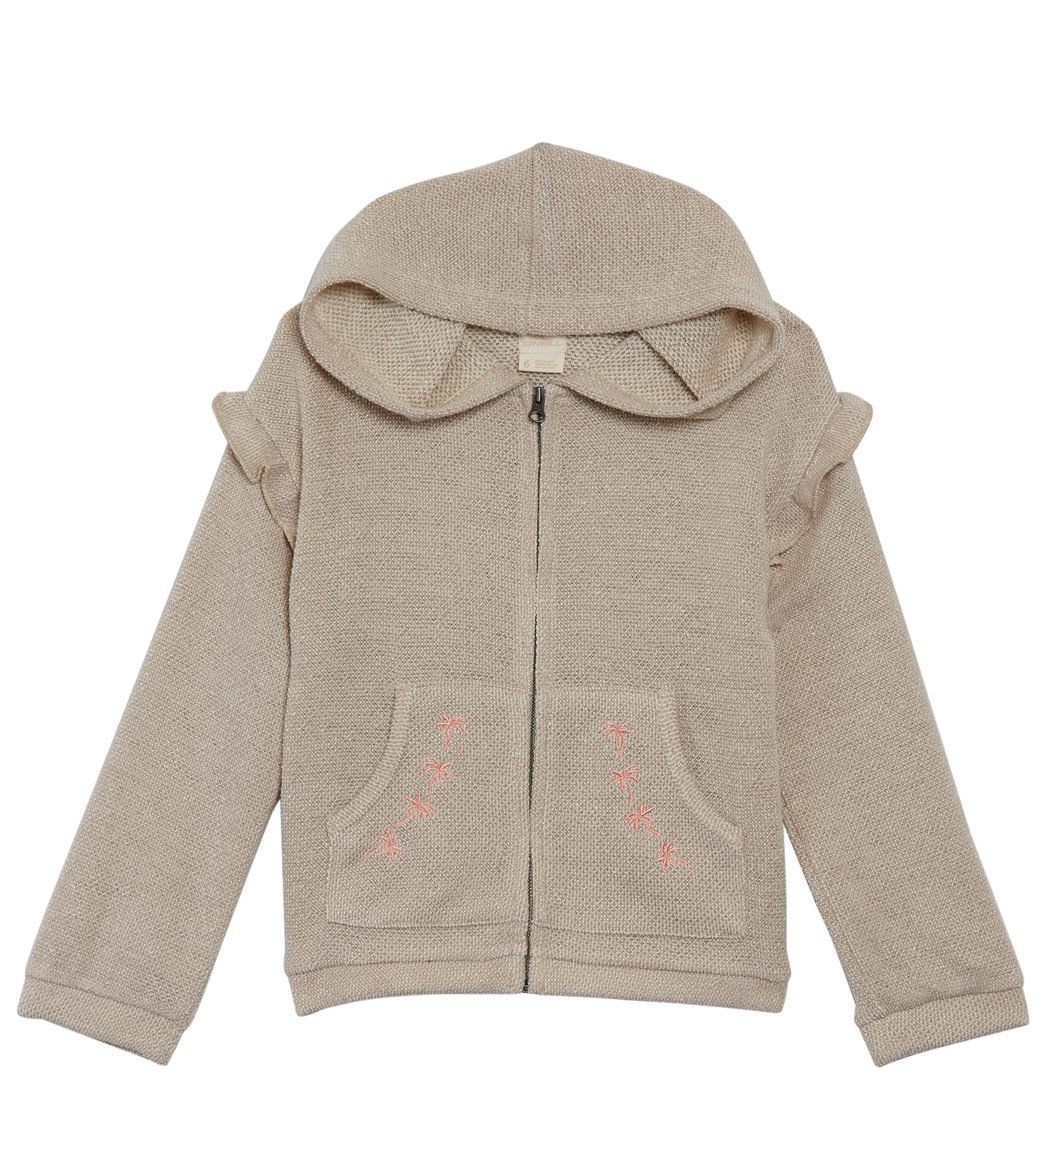 O'neill Girls' Lou Zip-Up Hoodie - Taupe 2T Acrylic/Cotton/Cotton/Polyester - Swimoutlet.com